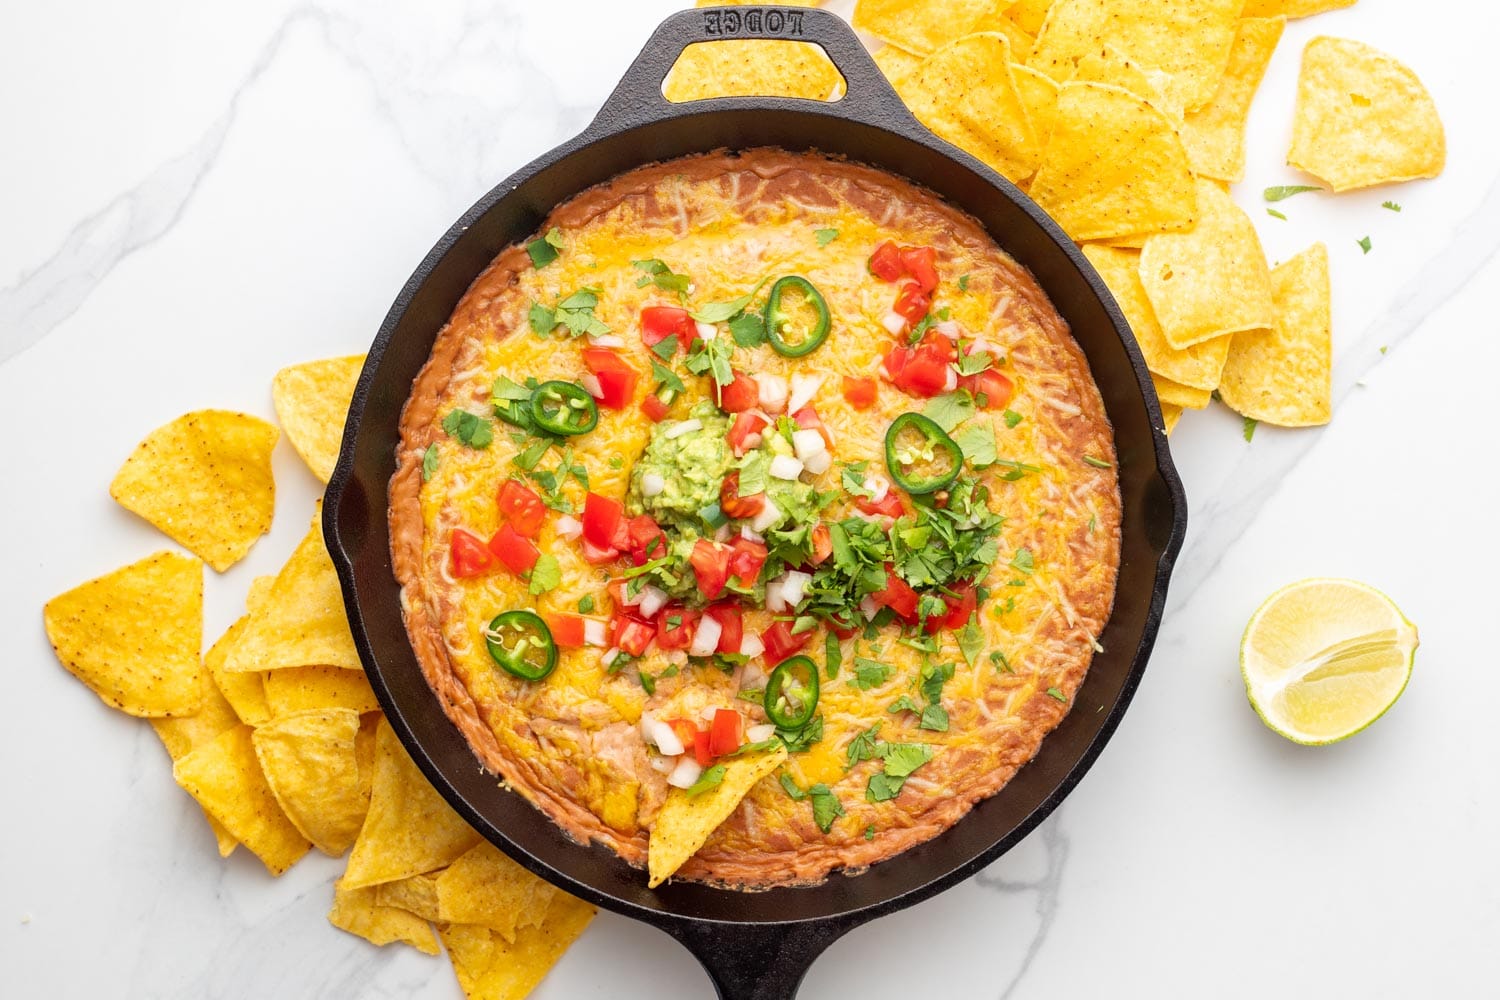 toppings added to cheesy bean dip in a lodge cast iron pan. around the pan are corn tortilla chips and half a lime.